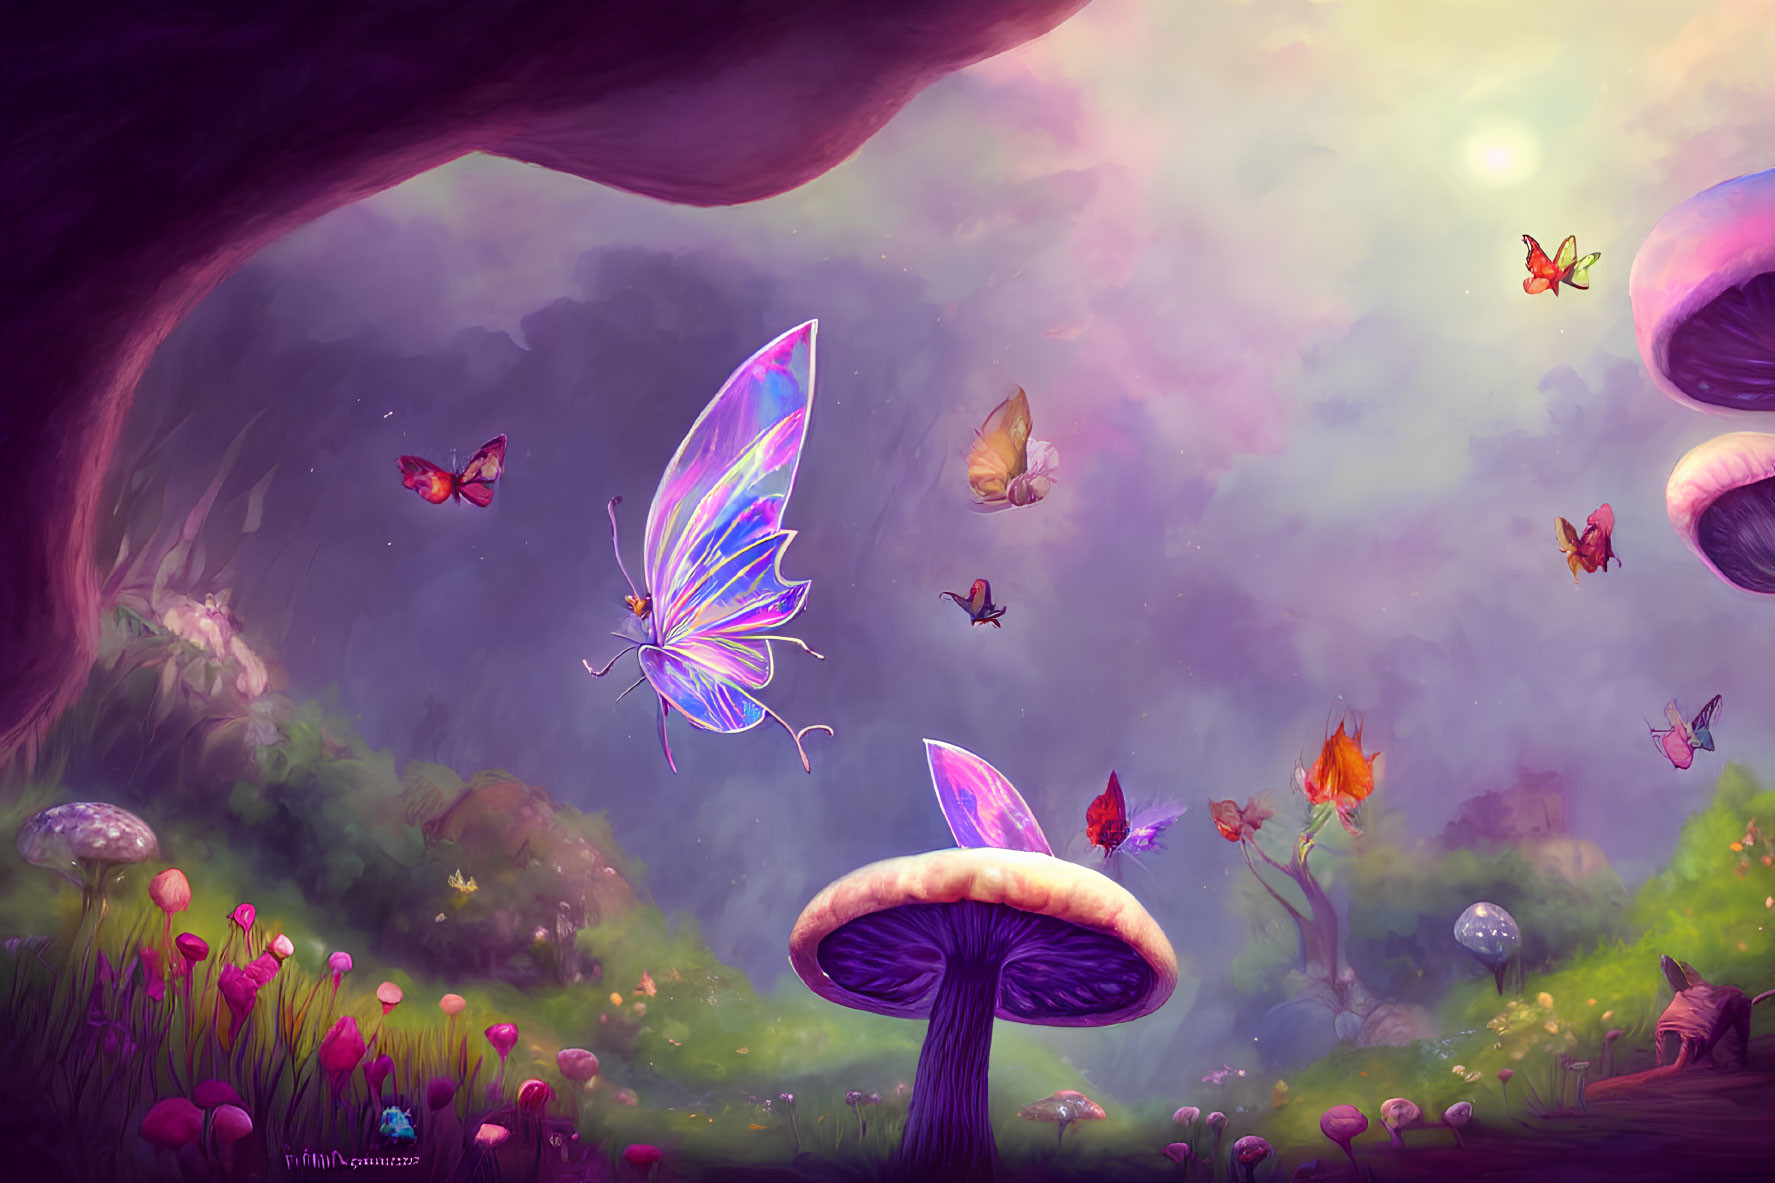 Colorful Enchanted Forest Artwork with Oversized Mushrooms and Butterflies